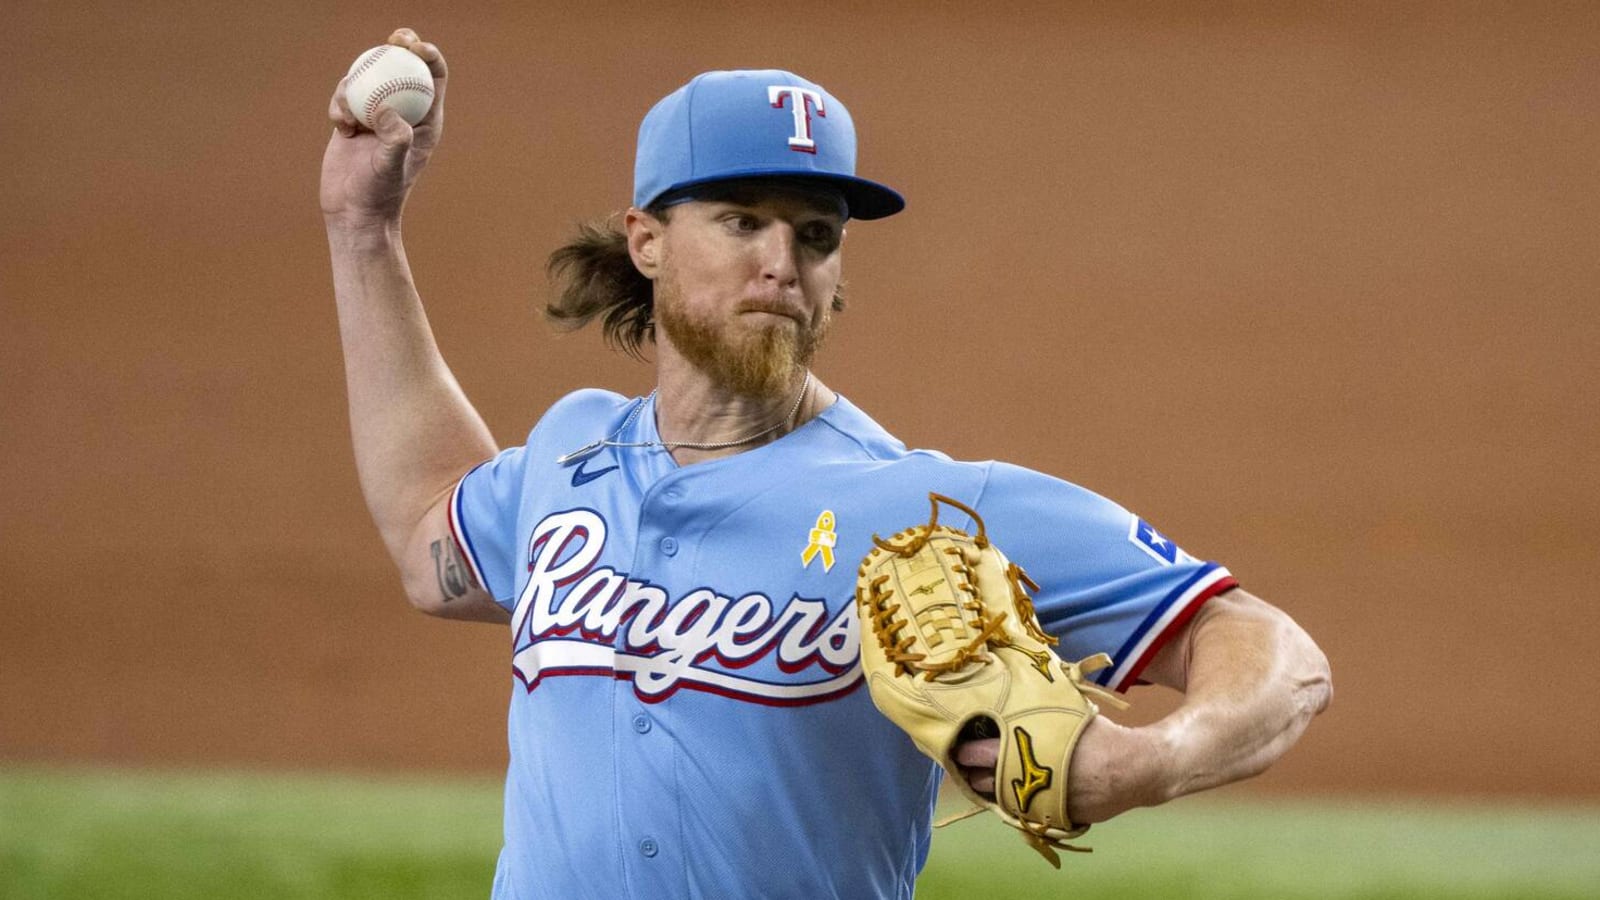 Rangers lose starting pitcher right before playoffs